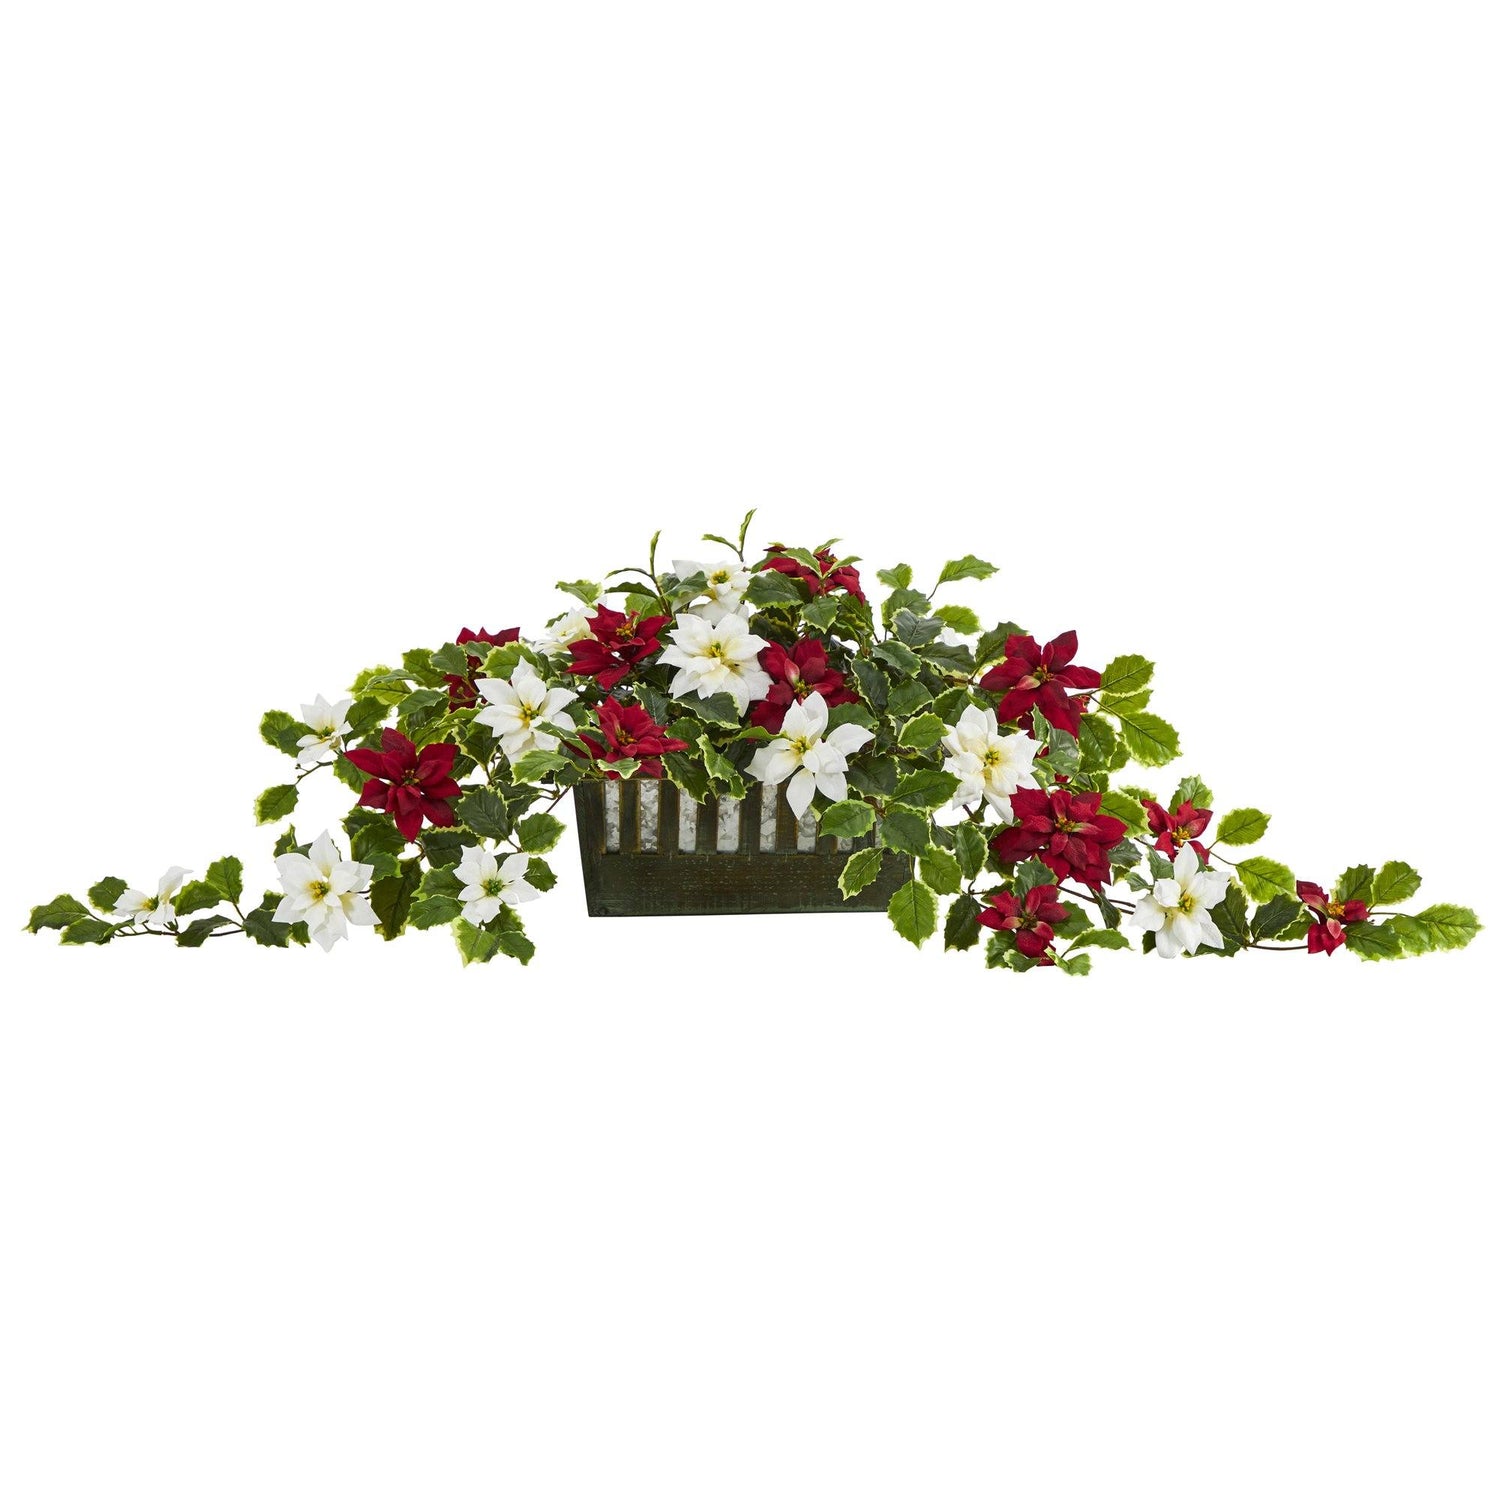 39” Poinsettia and Variegated Holly Artificial Plant in Decorative Planter (Real Touch)